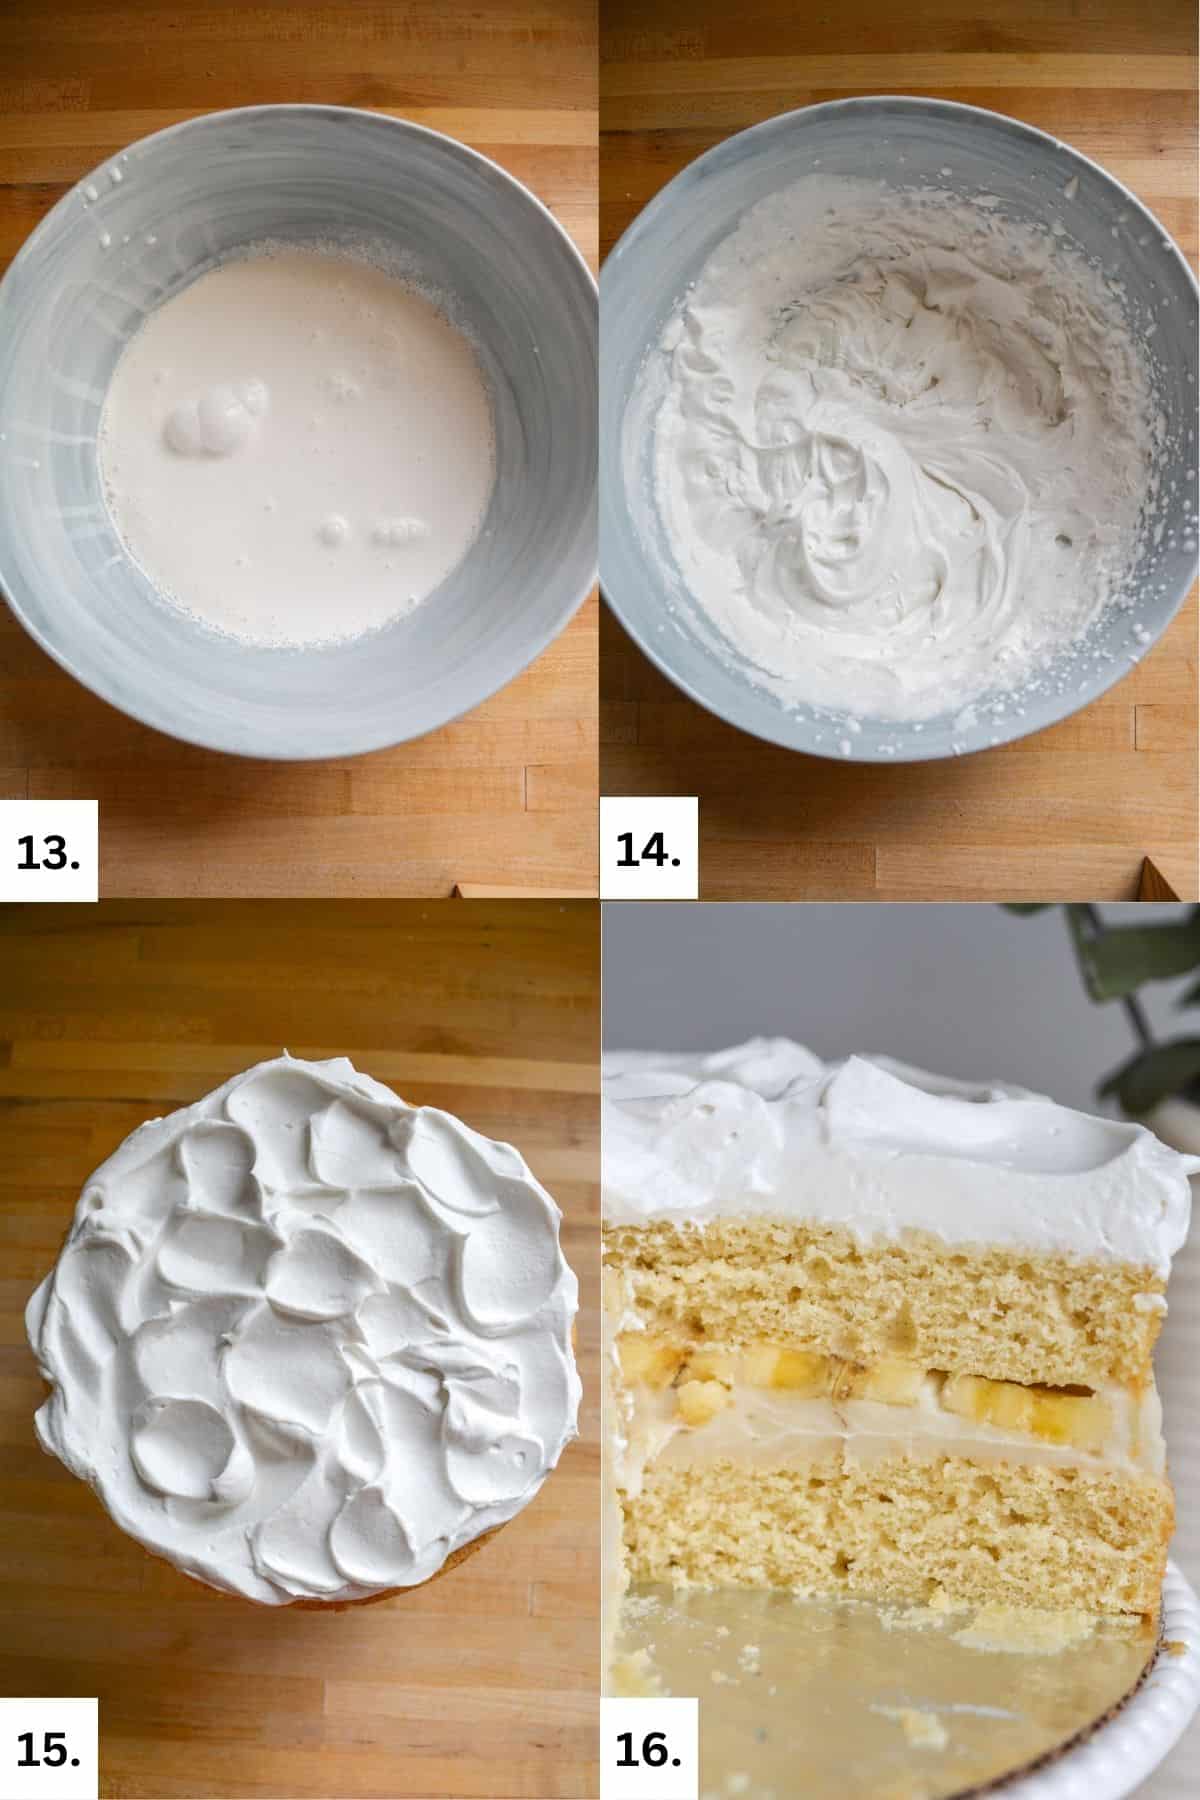 Step by step photos of making vegan whipped cream and topping the cake.